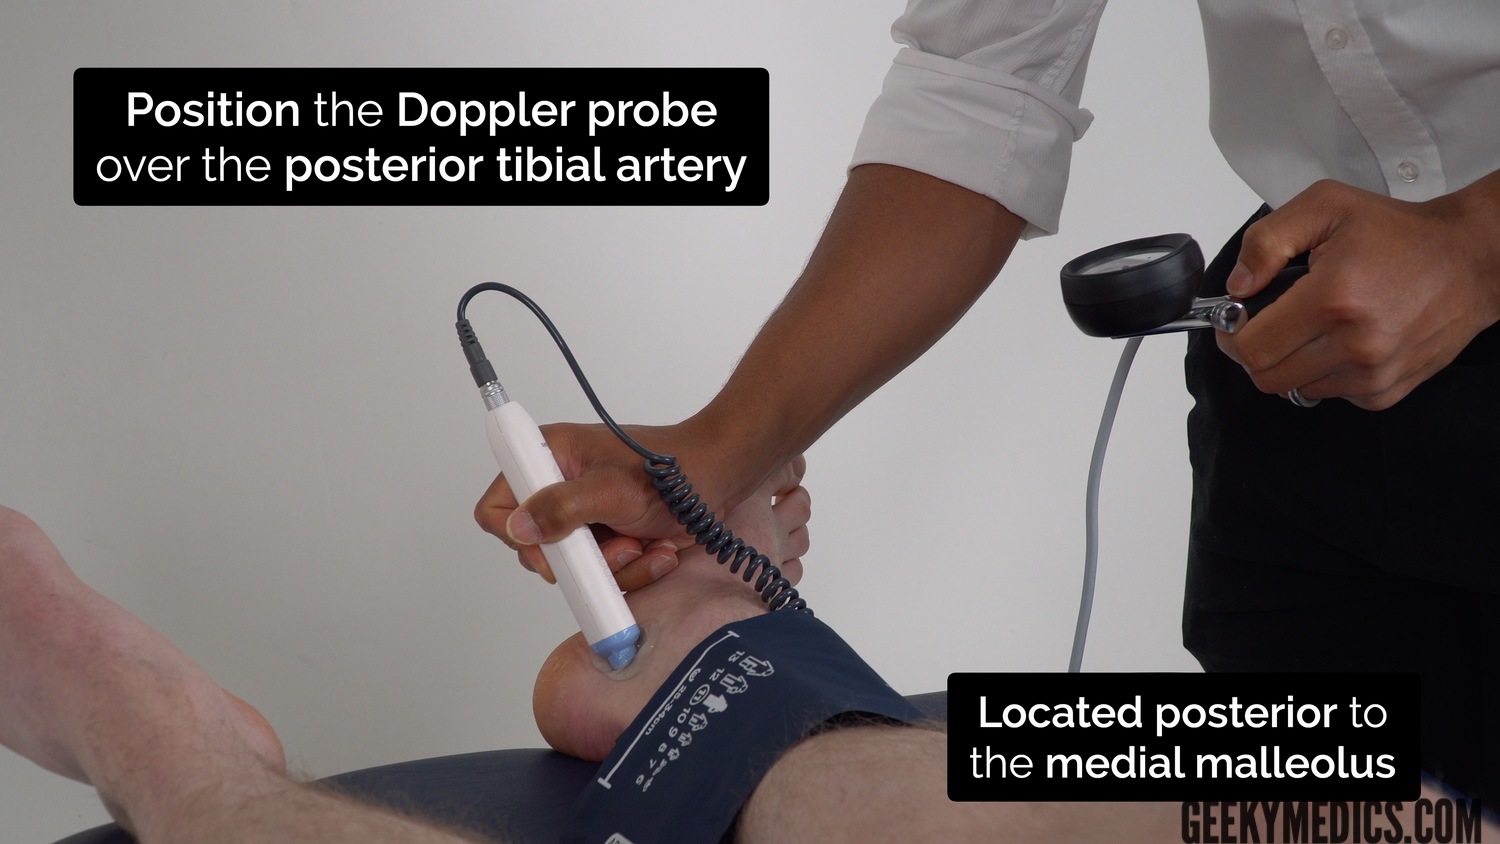 Position the Doppler probe over the posterior tibial artery, which is located posterior to the medial malleolus.